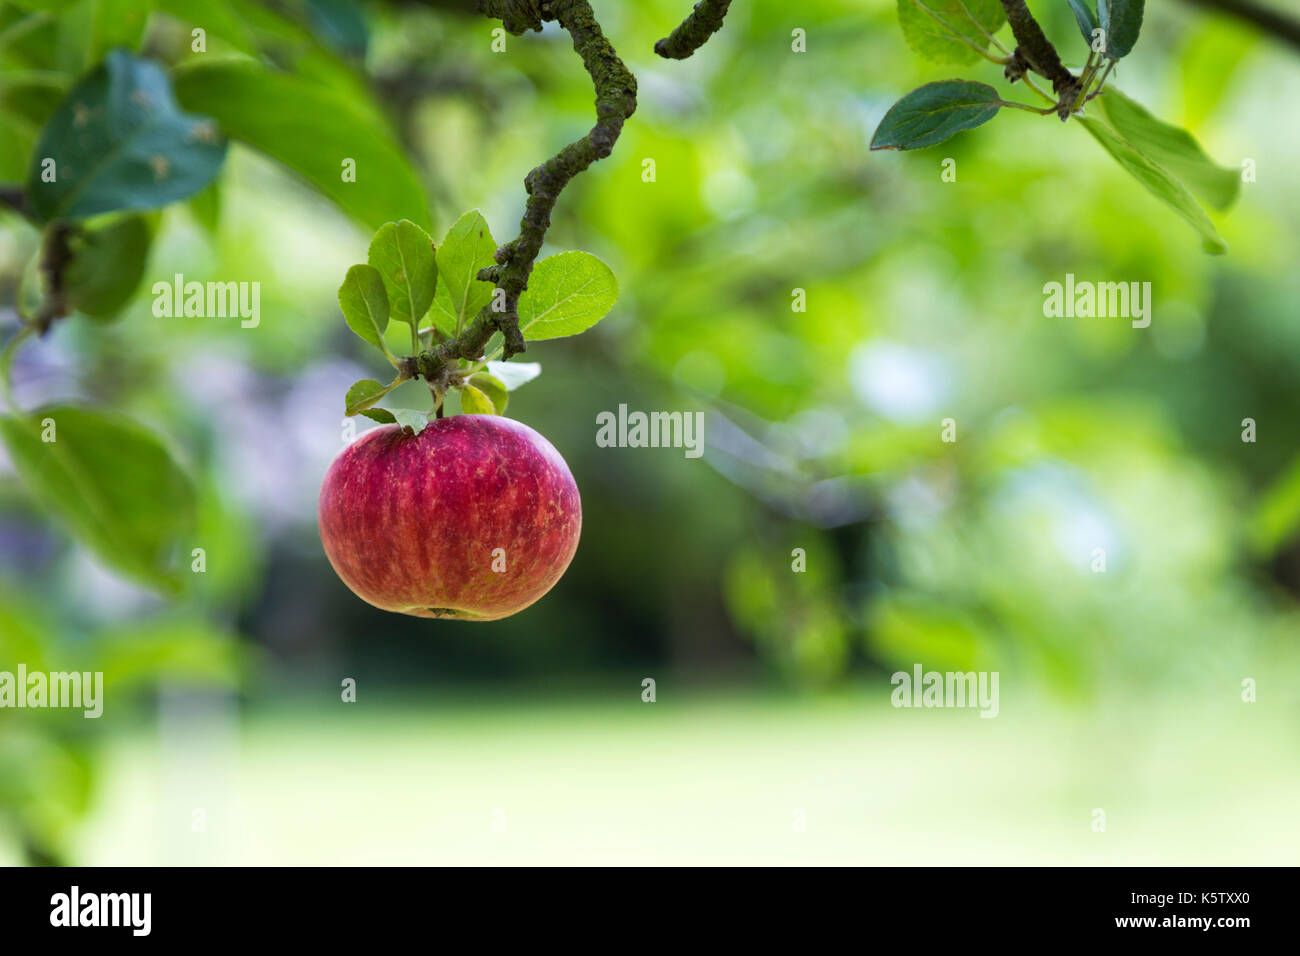 A ripe red apple hanging from a branch (Cambridge, UK) Stock Photo